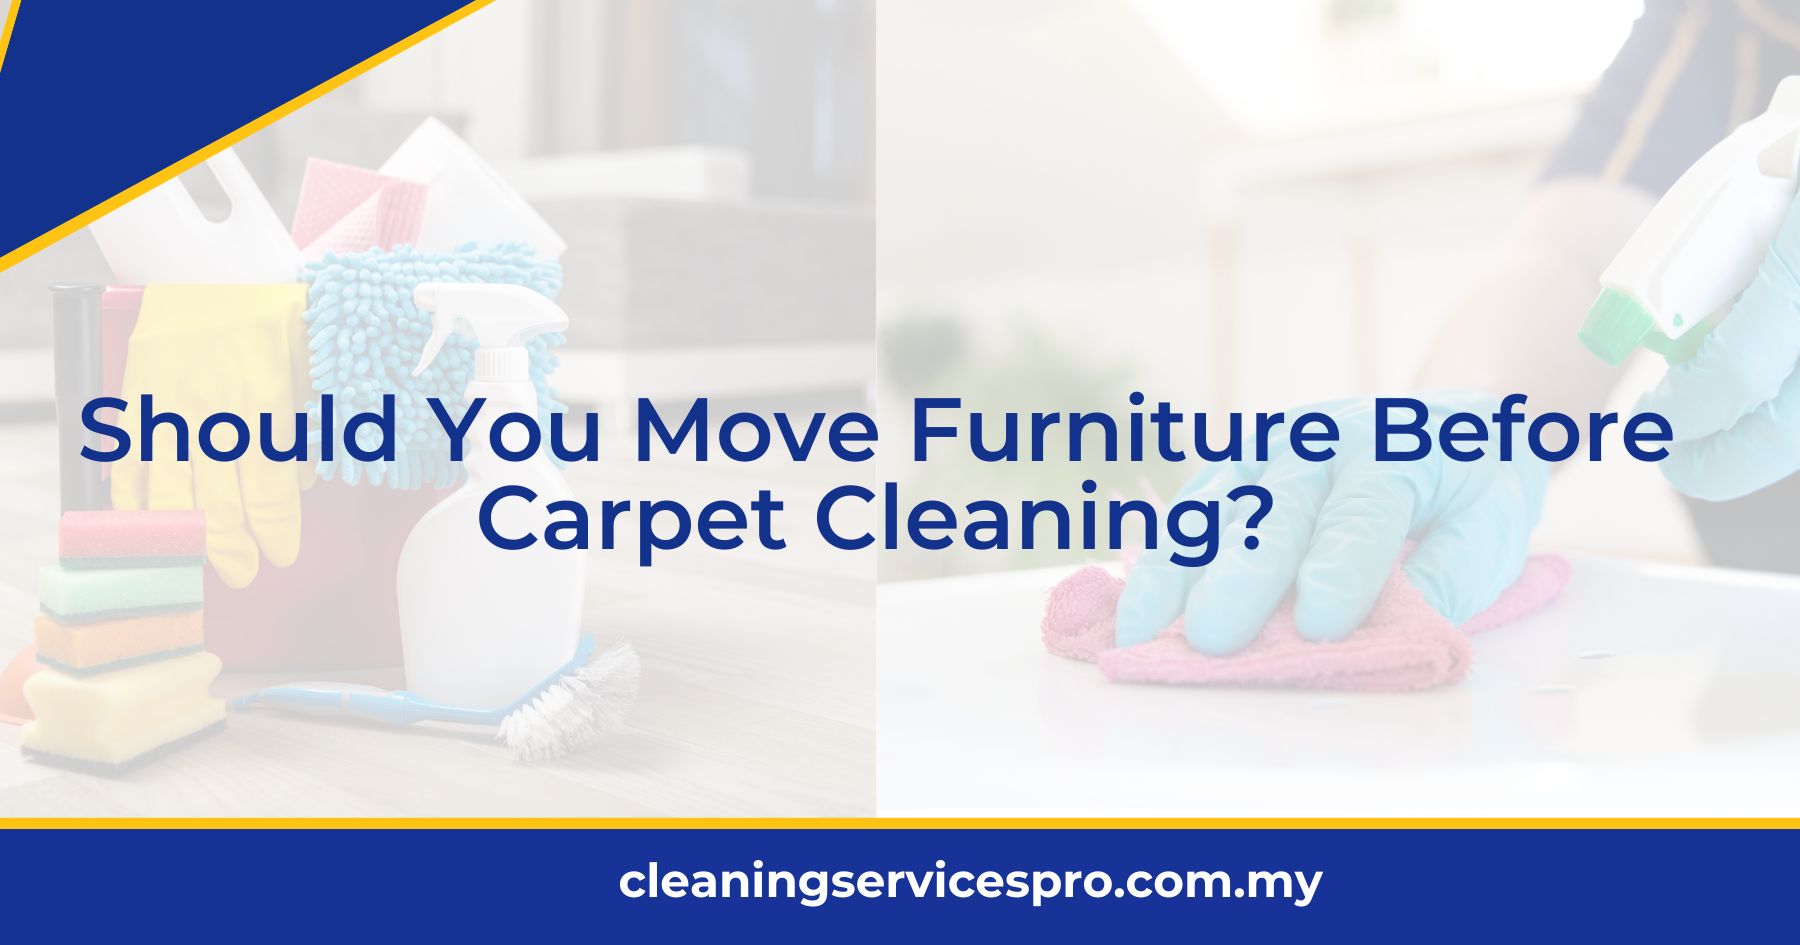 Should You Move Furniture Before Carpet Cleaning?